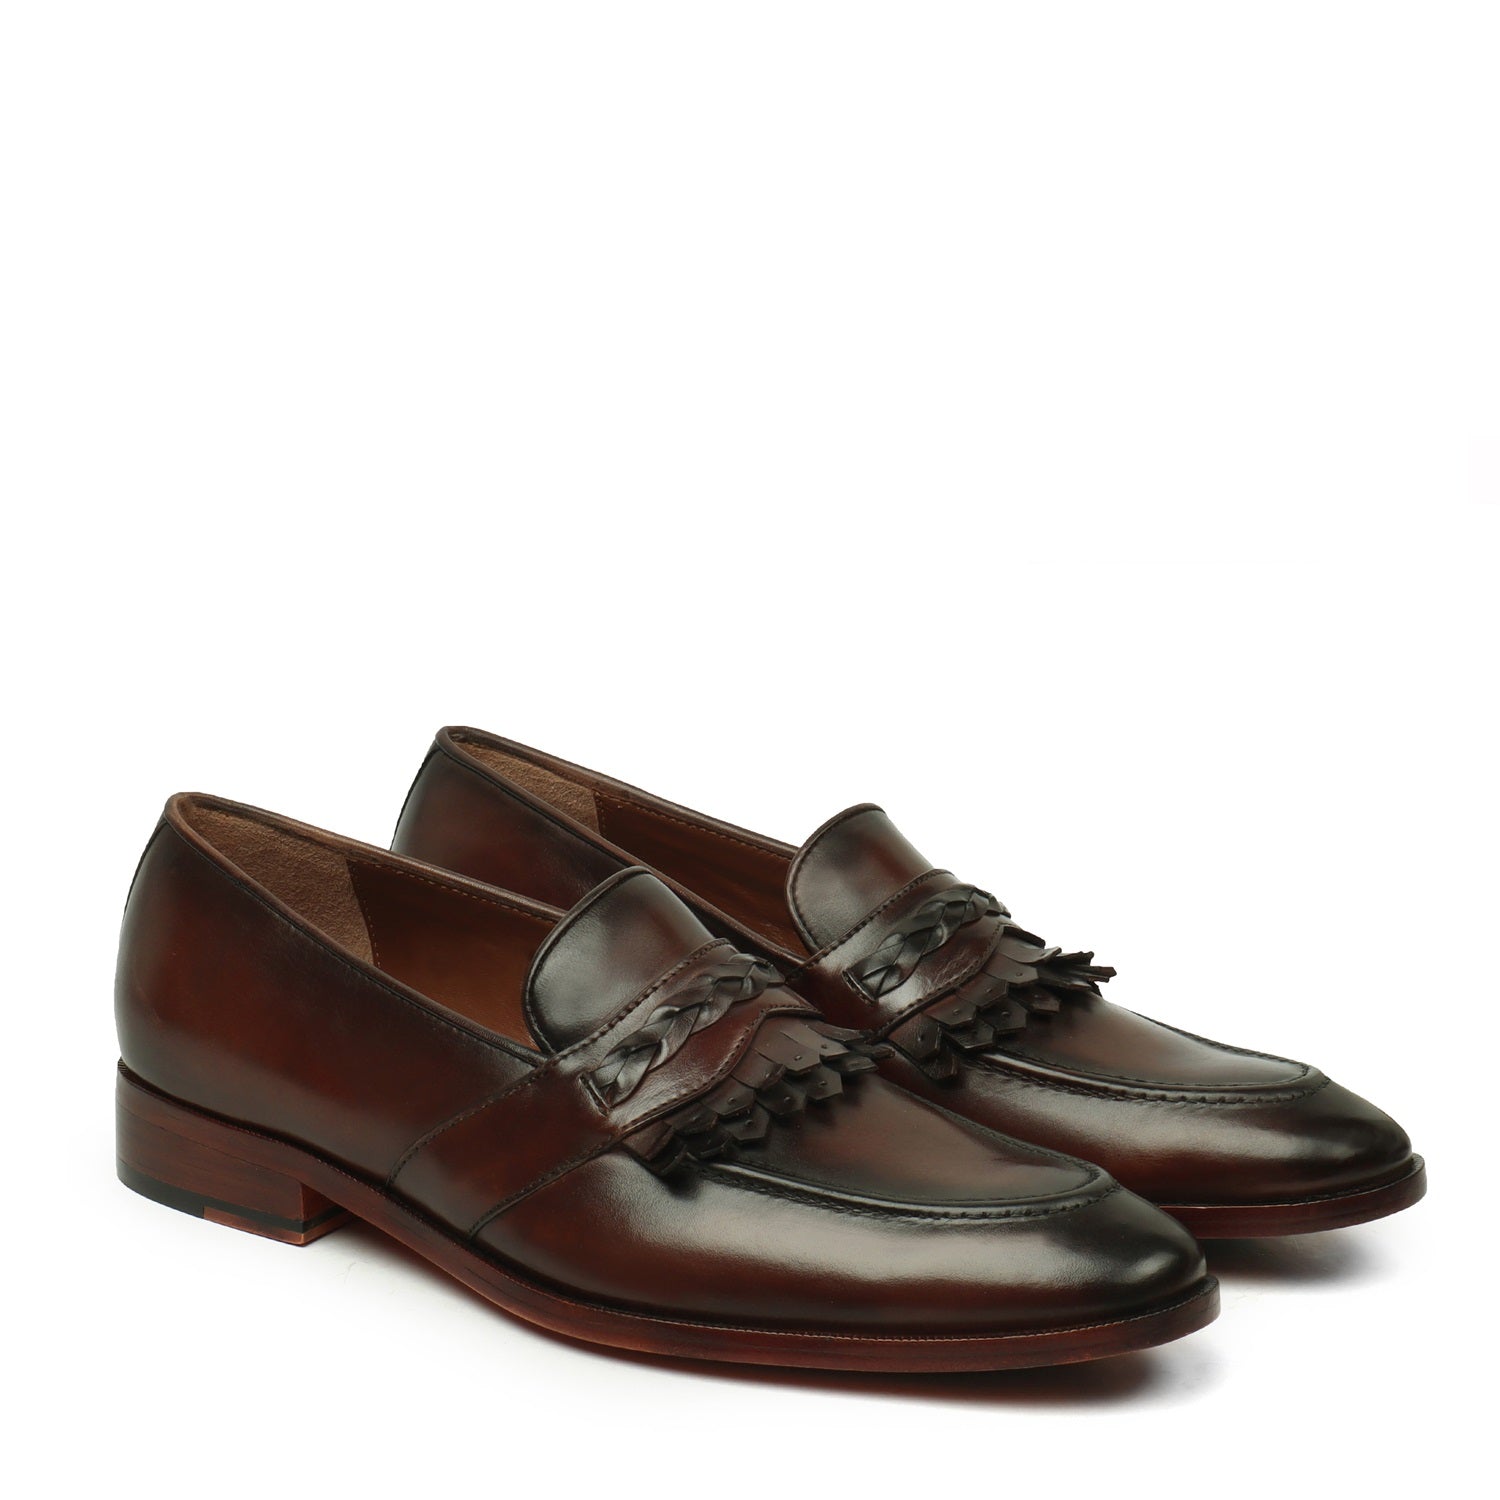 Weaved Strip Slip-On Loafers in Dark Brown Leather with Dual Fringes by Brune & Bareskin